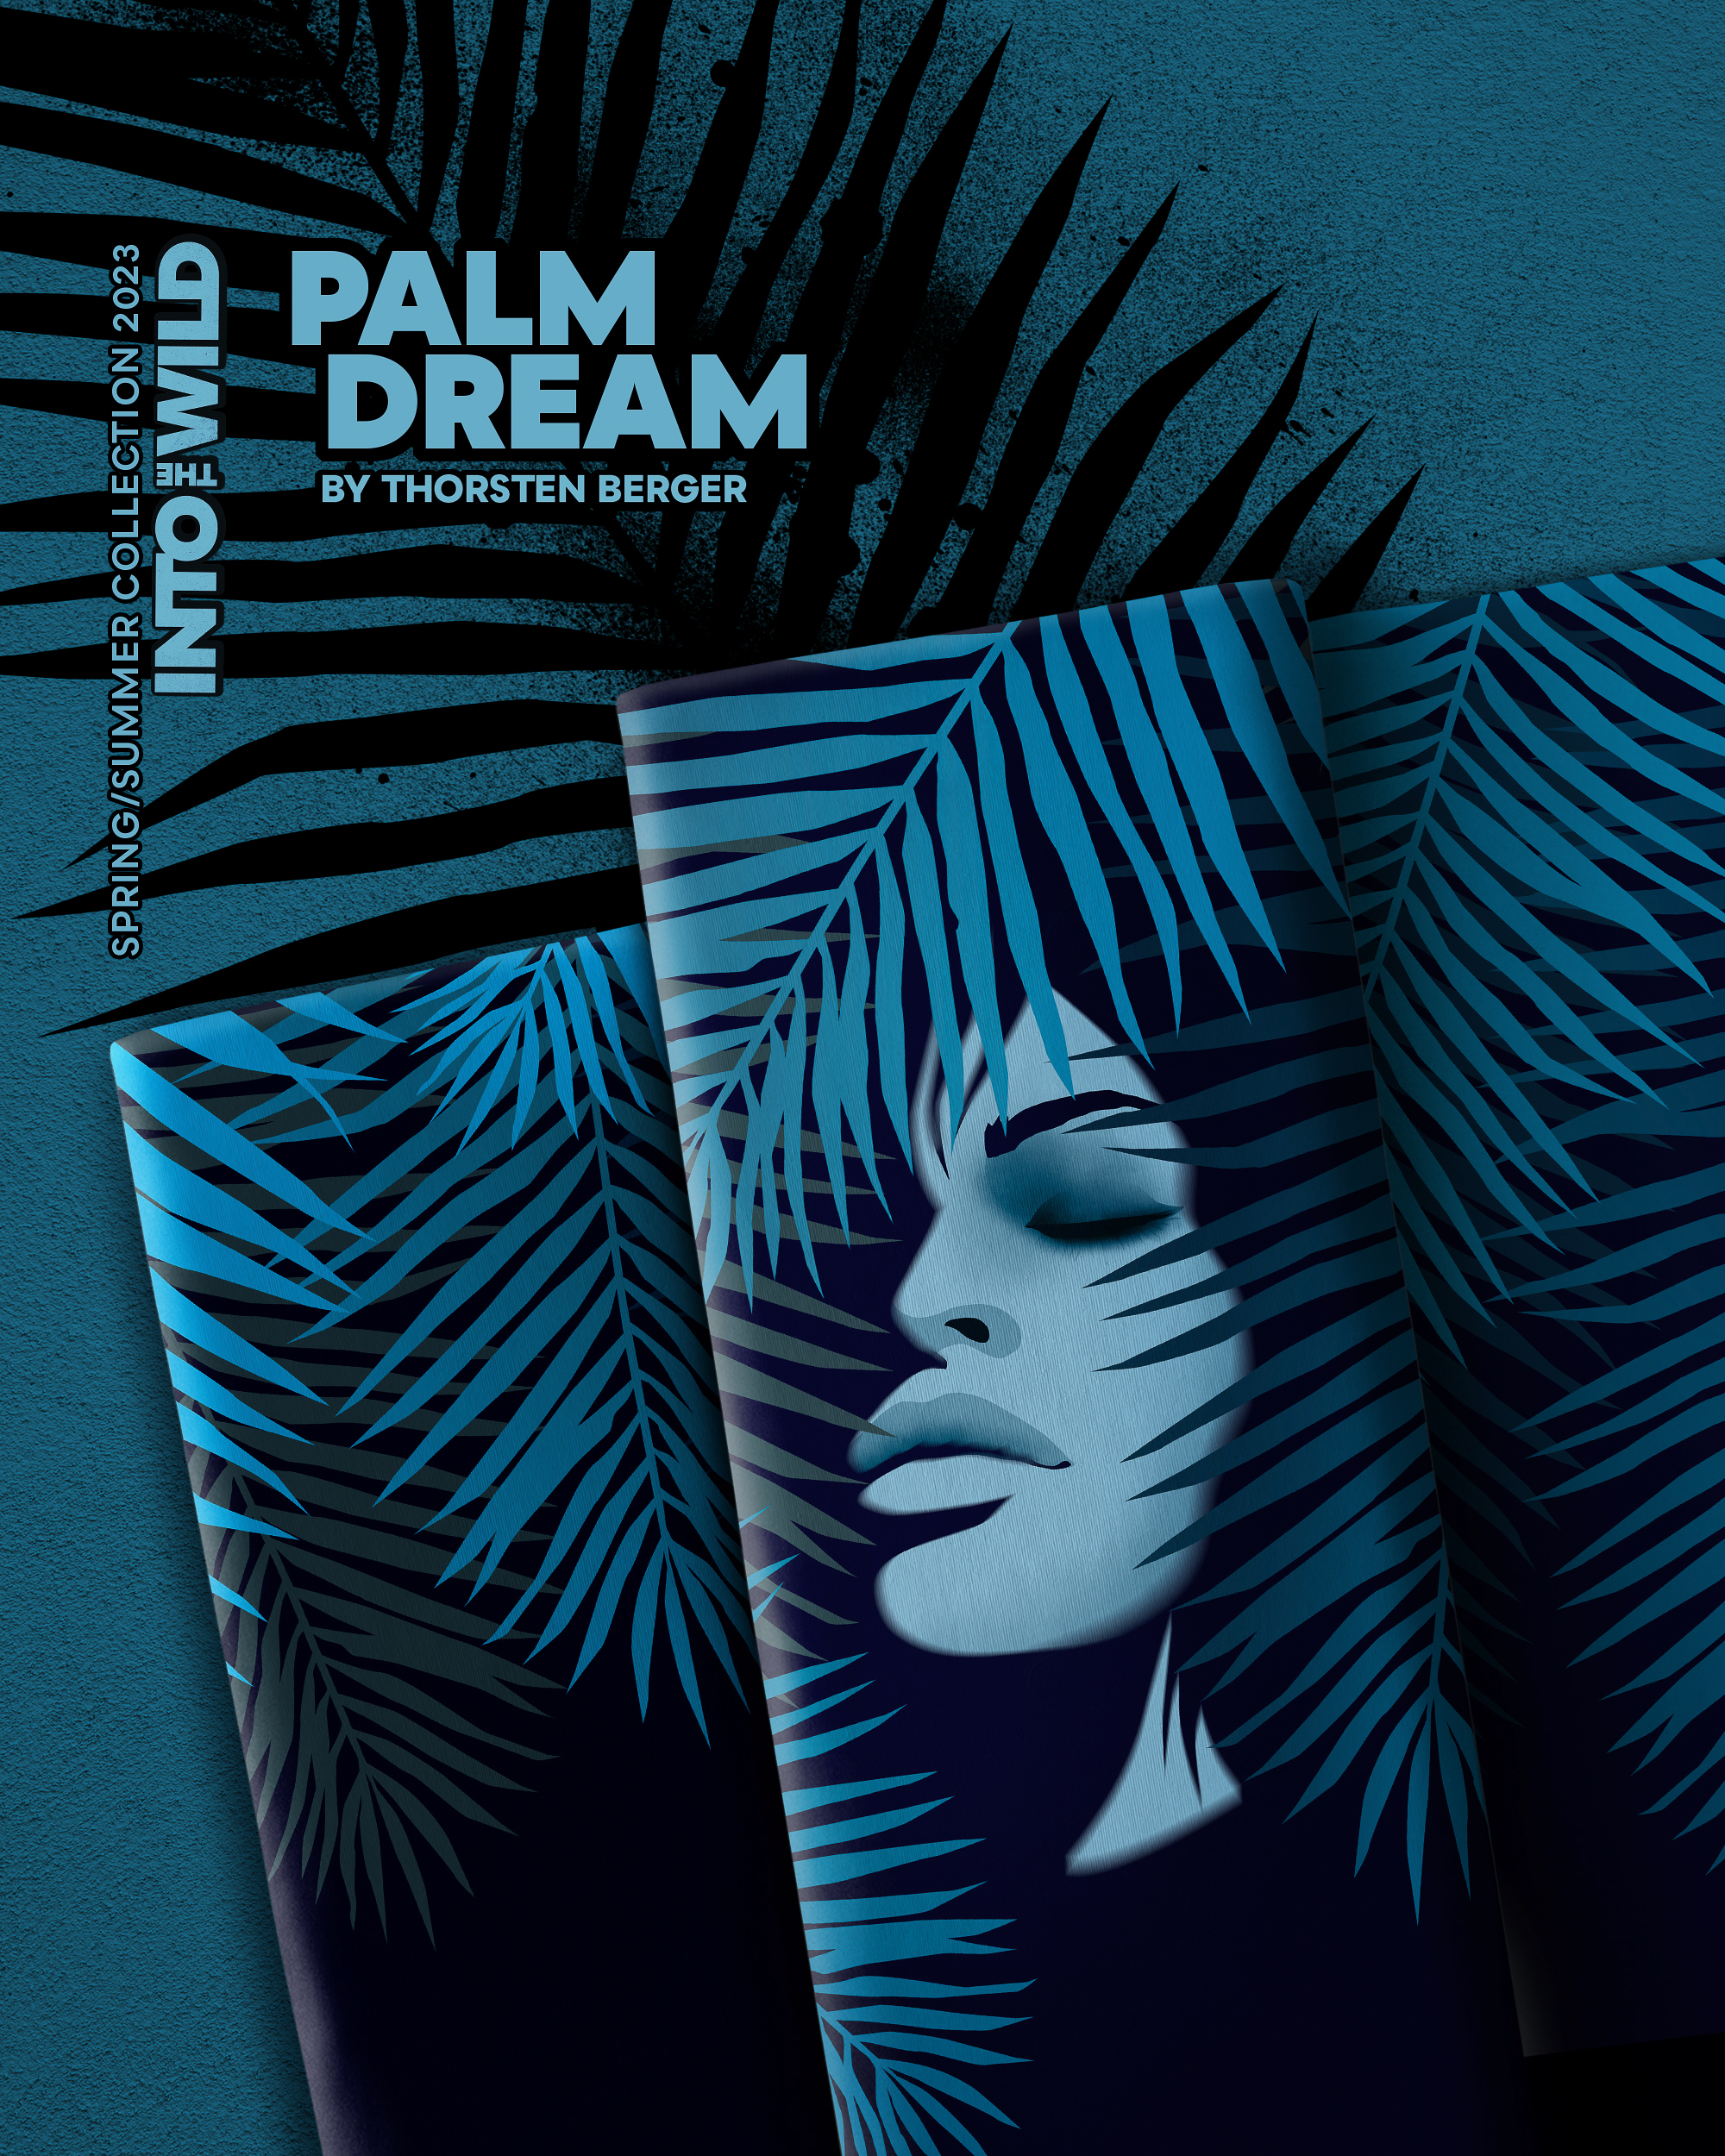 Modaal+puuvill dressiriie, kupong - naine ja palmilehed, Palm Dream by Thorsten Berger